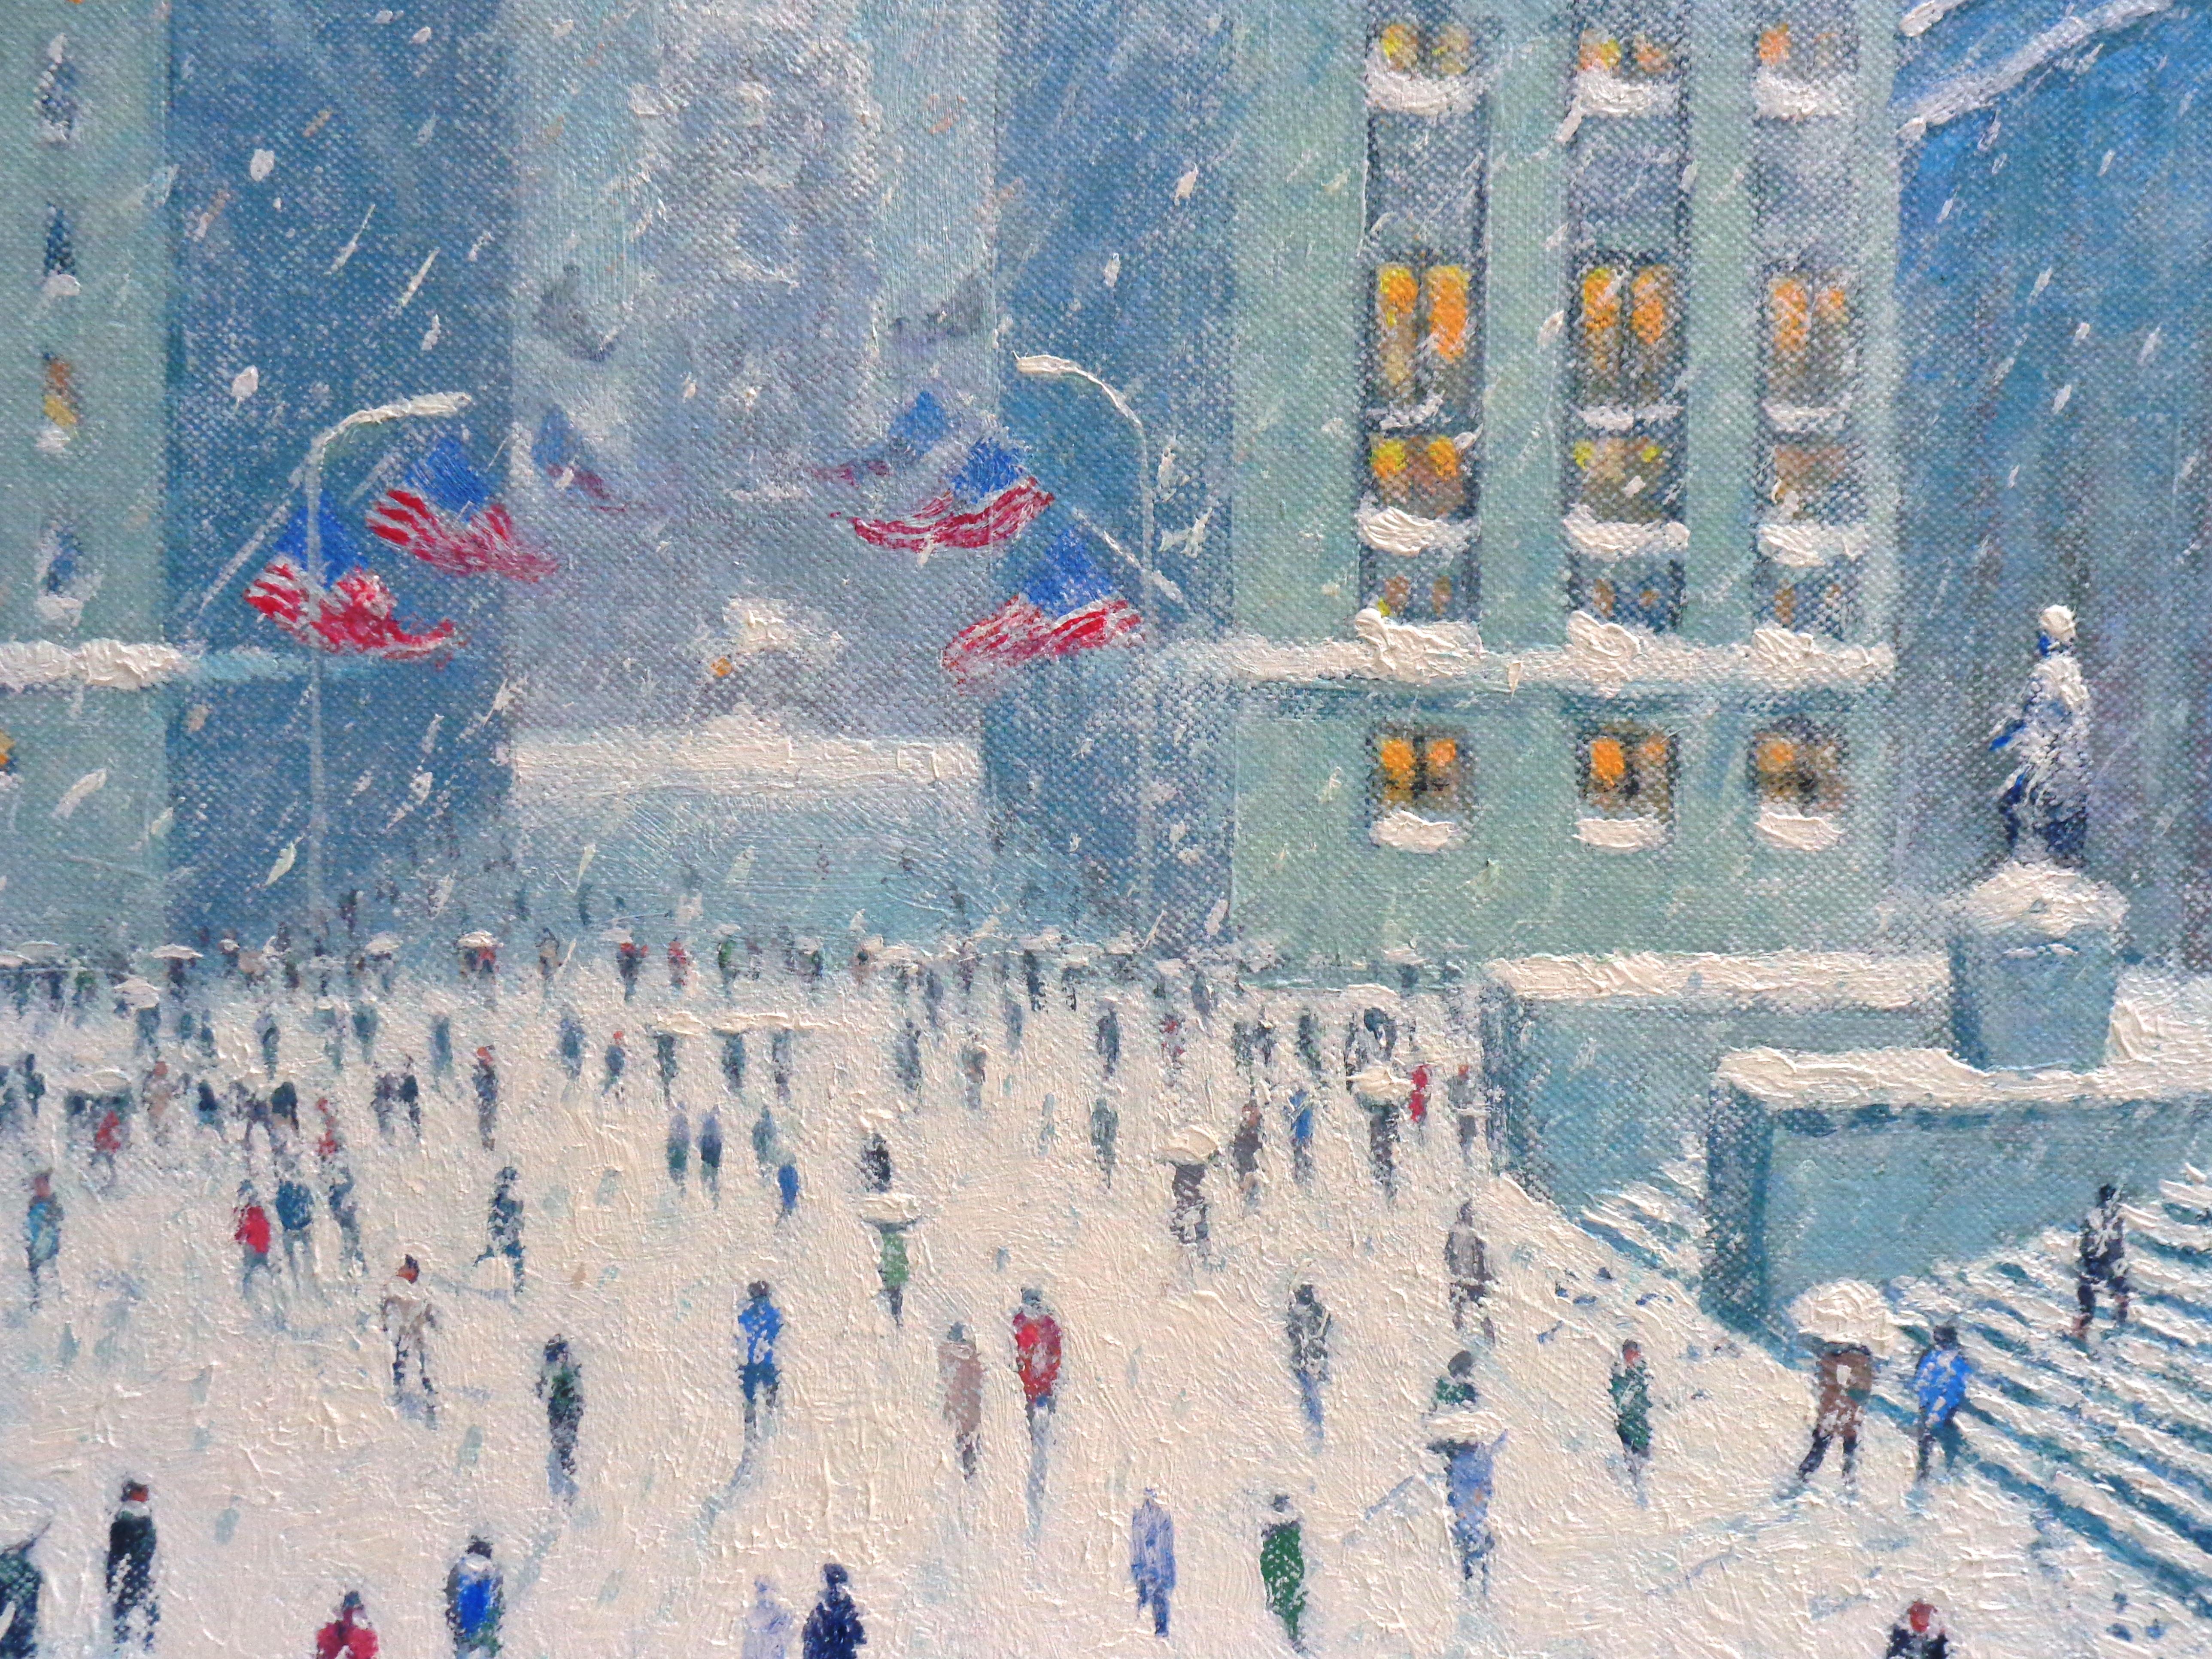  New York City Winter Wall Street Flags Oil Painting by Michael Budden 2